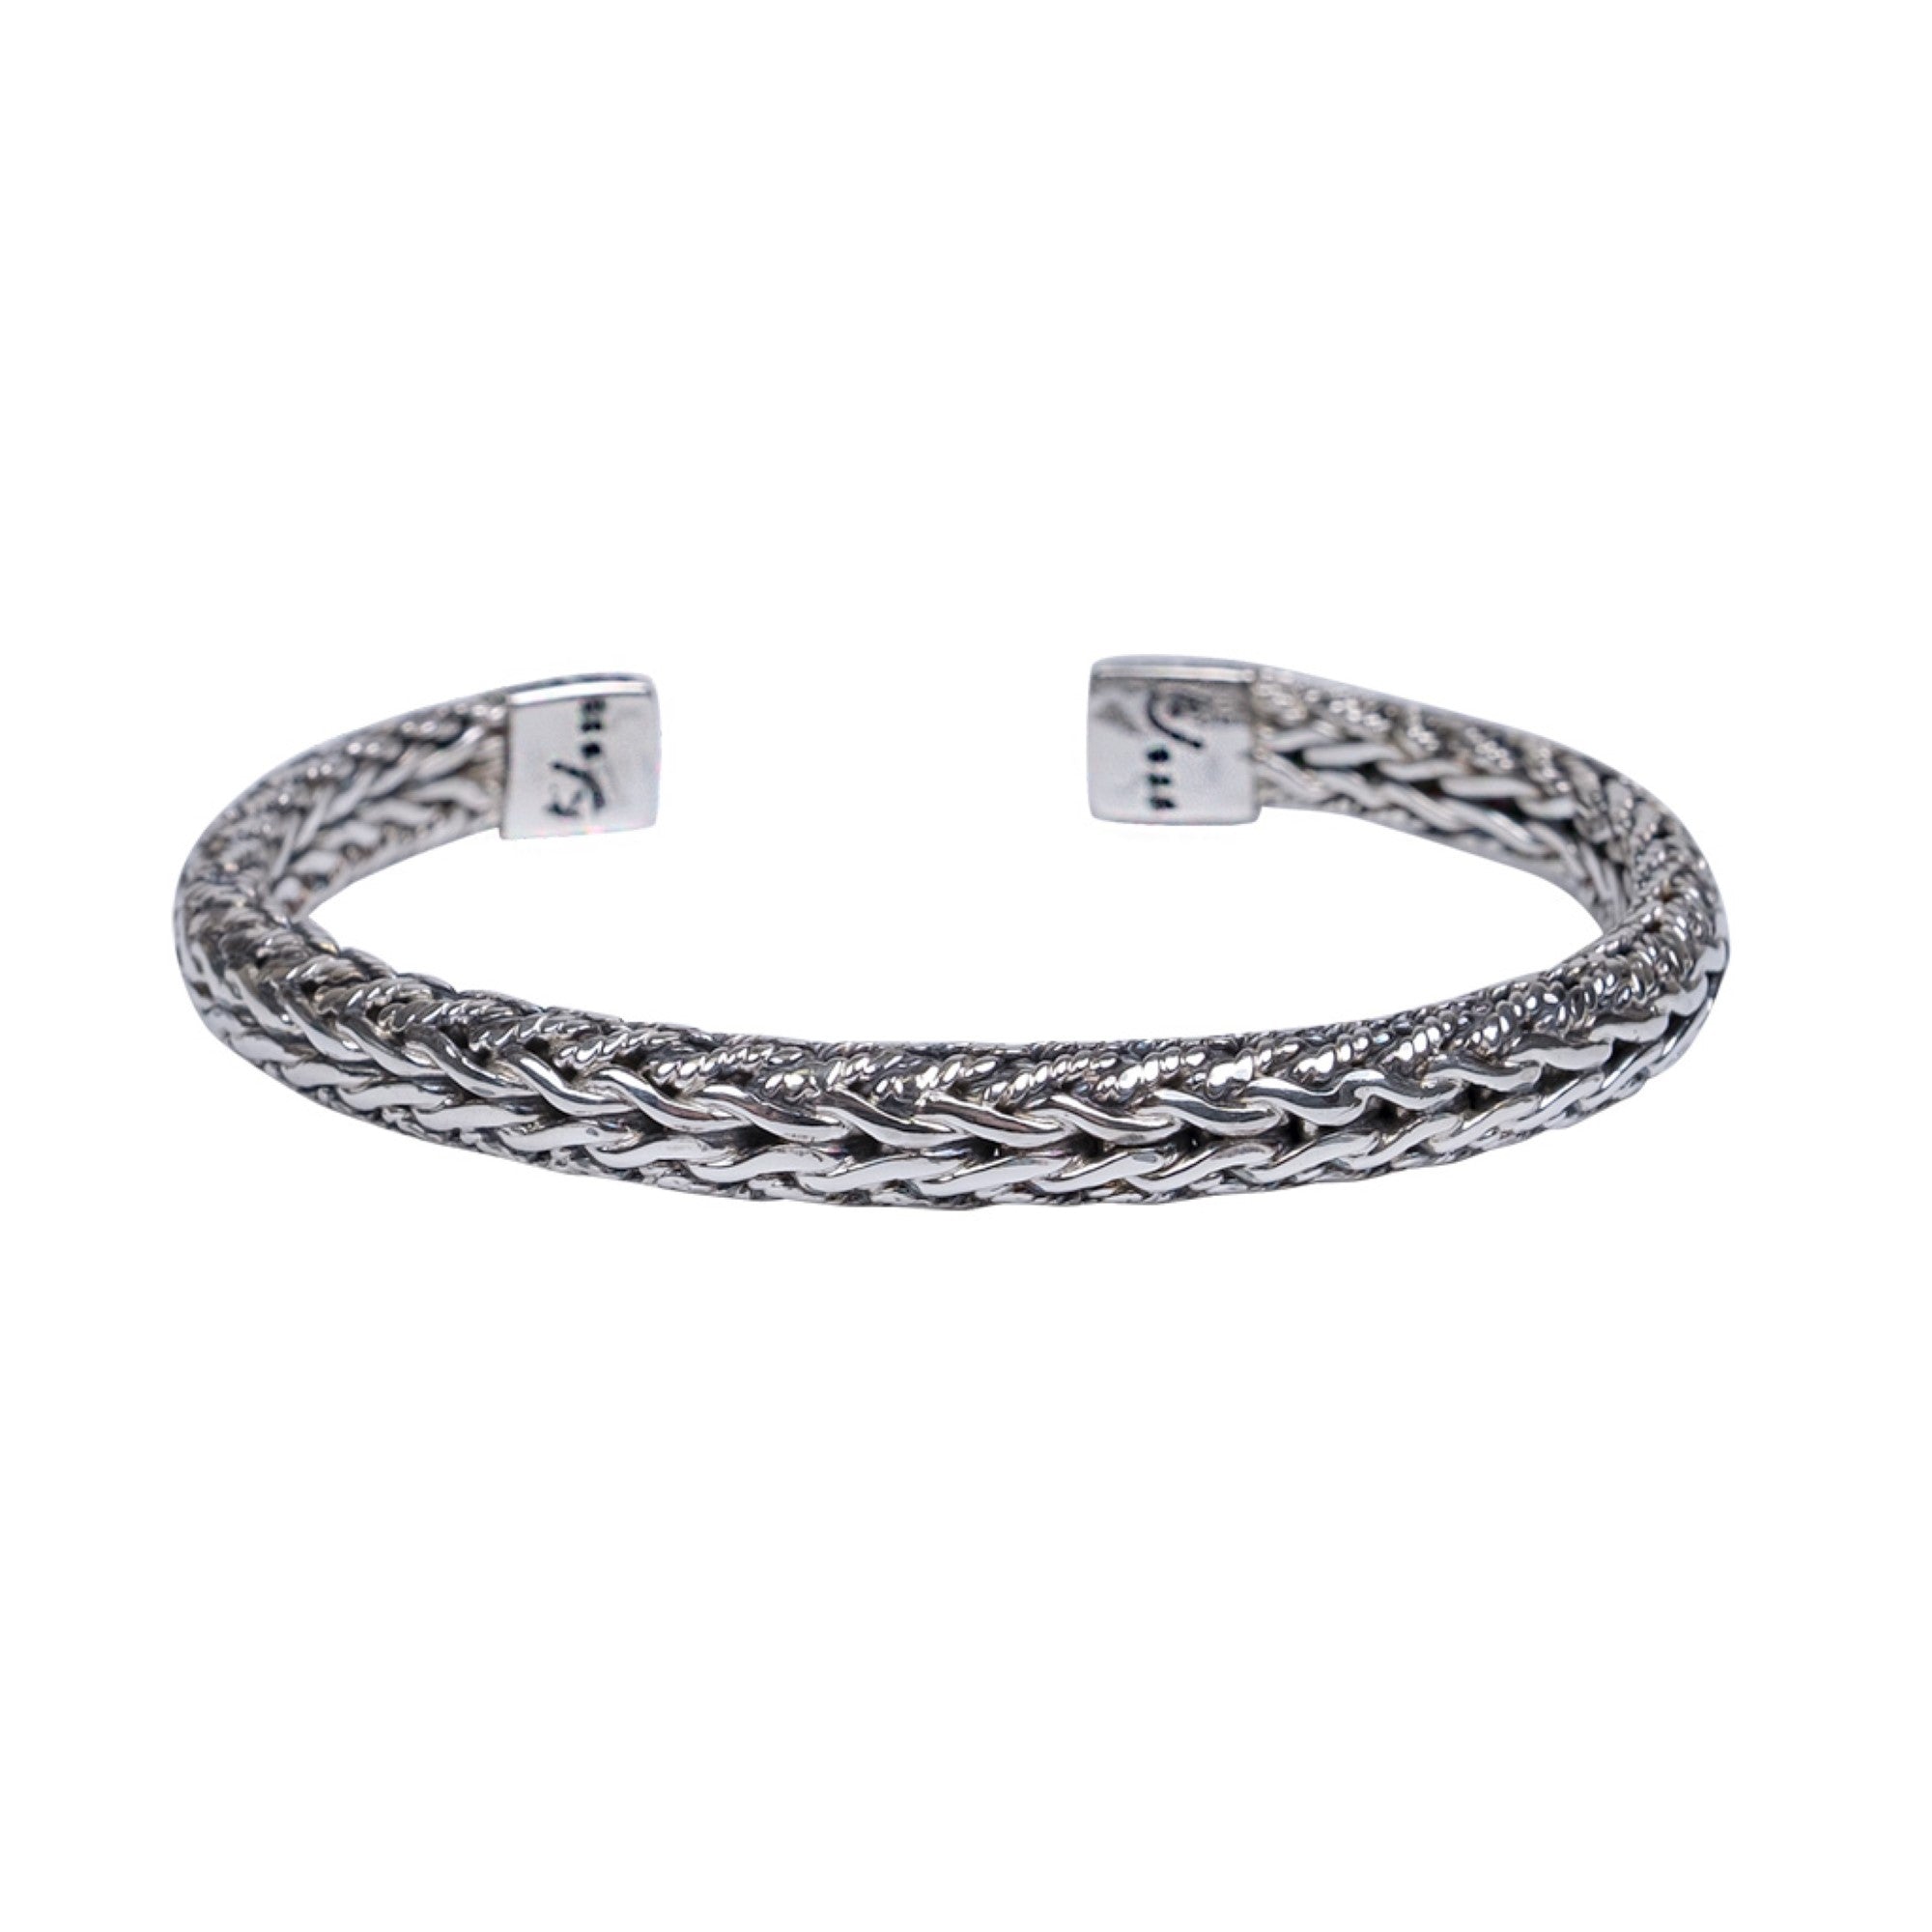 Oval Dragon Weave Bangle, Sterling Silver